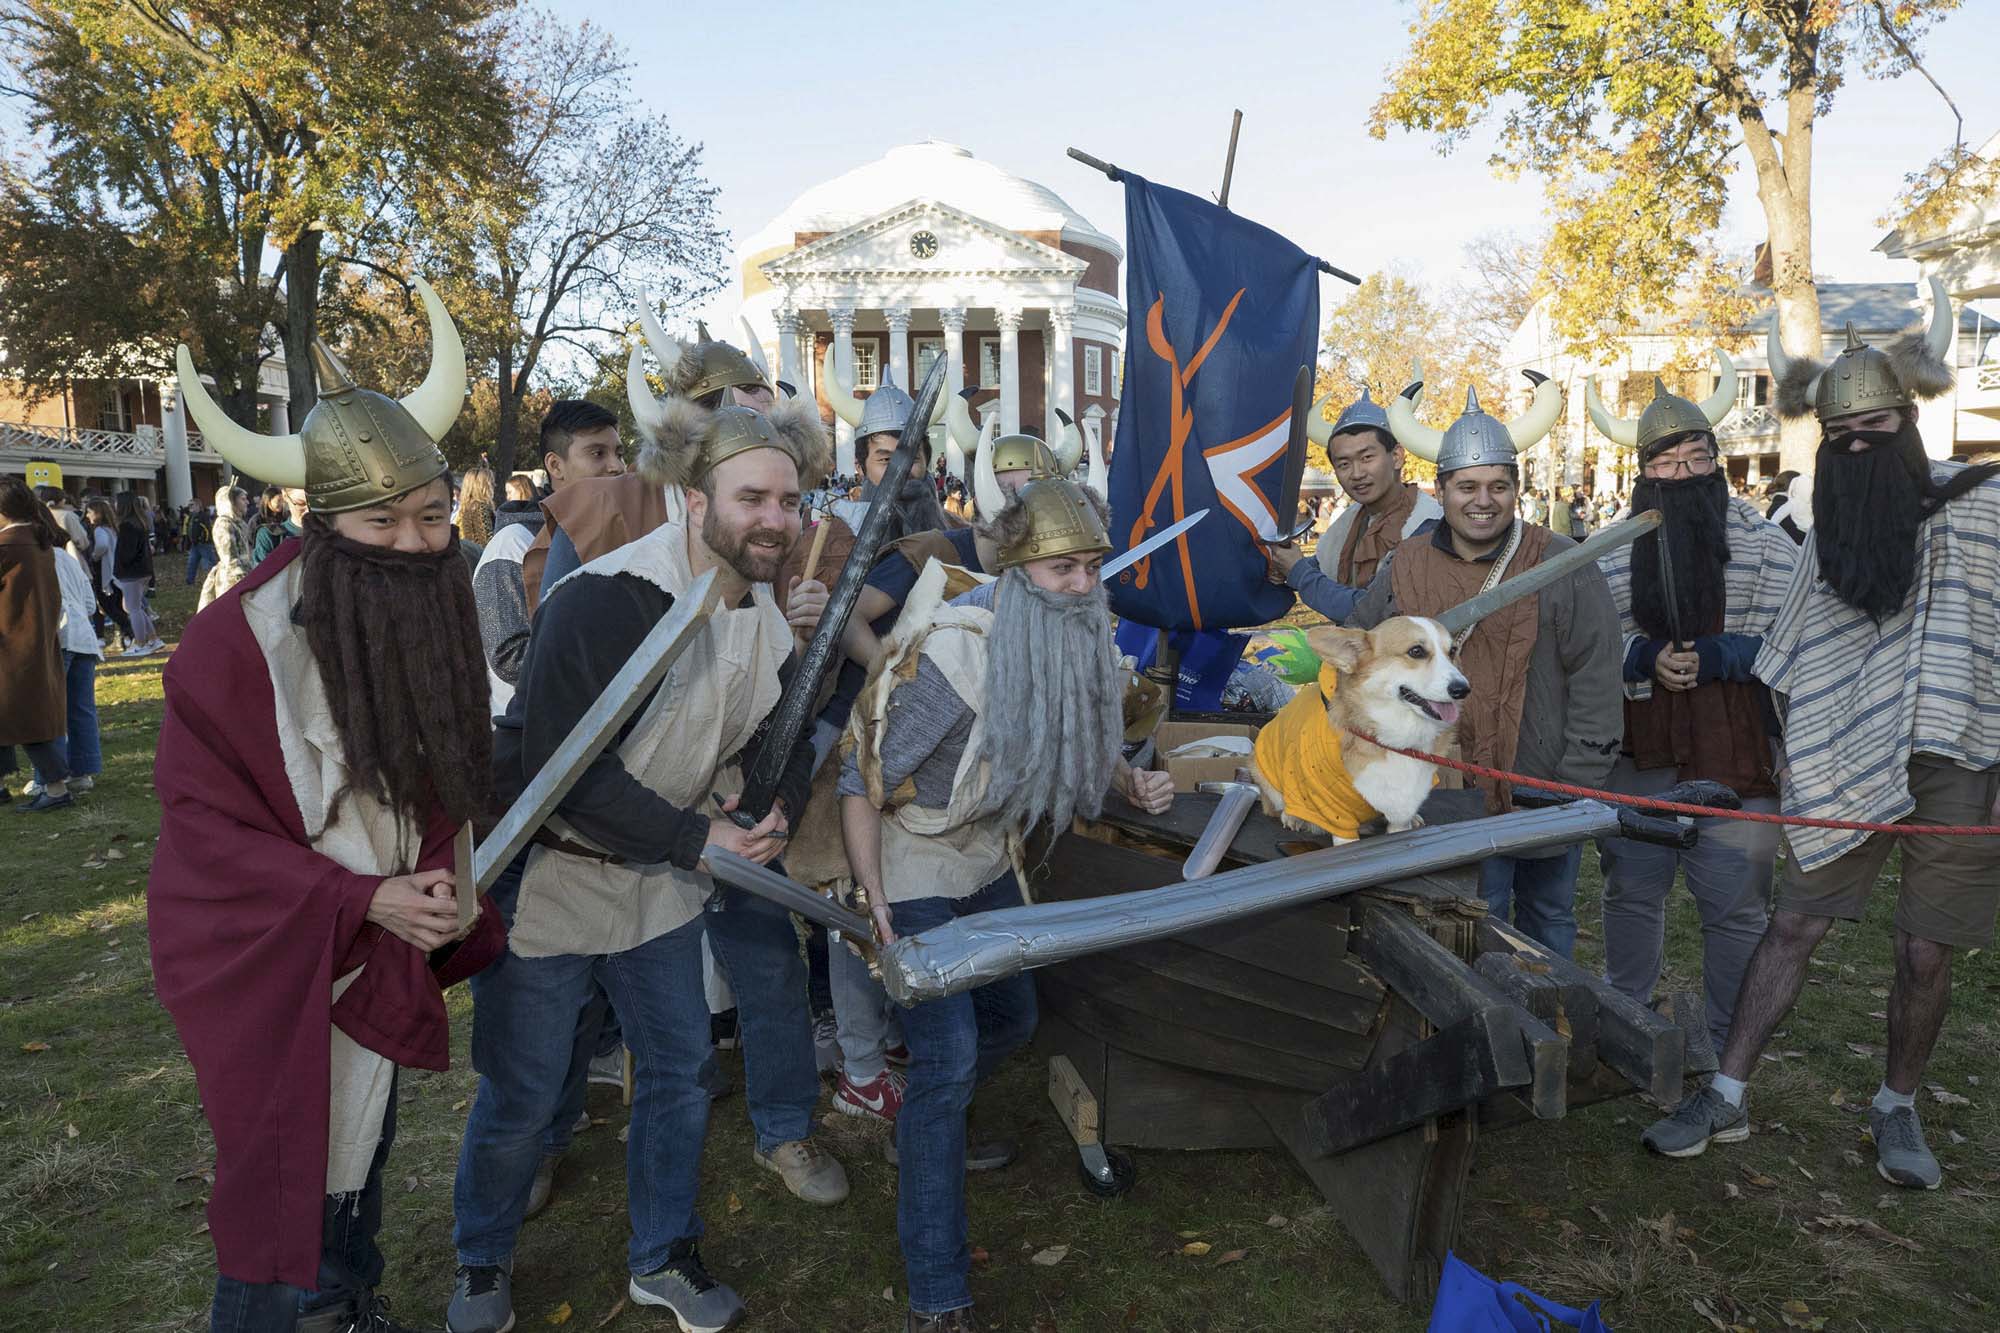 People in Viking costumes on the lawn pose with a corgi in a yellow shirt